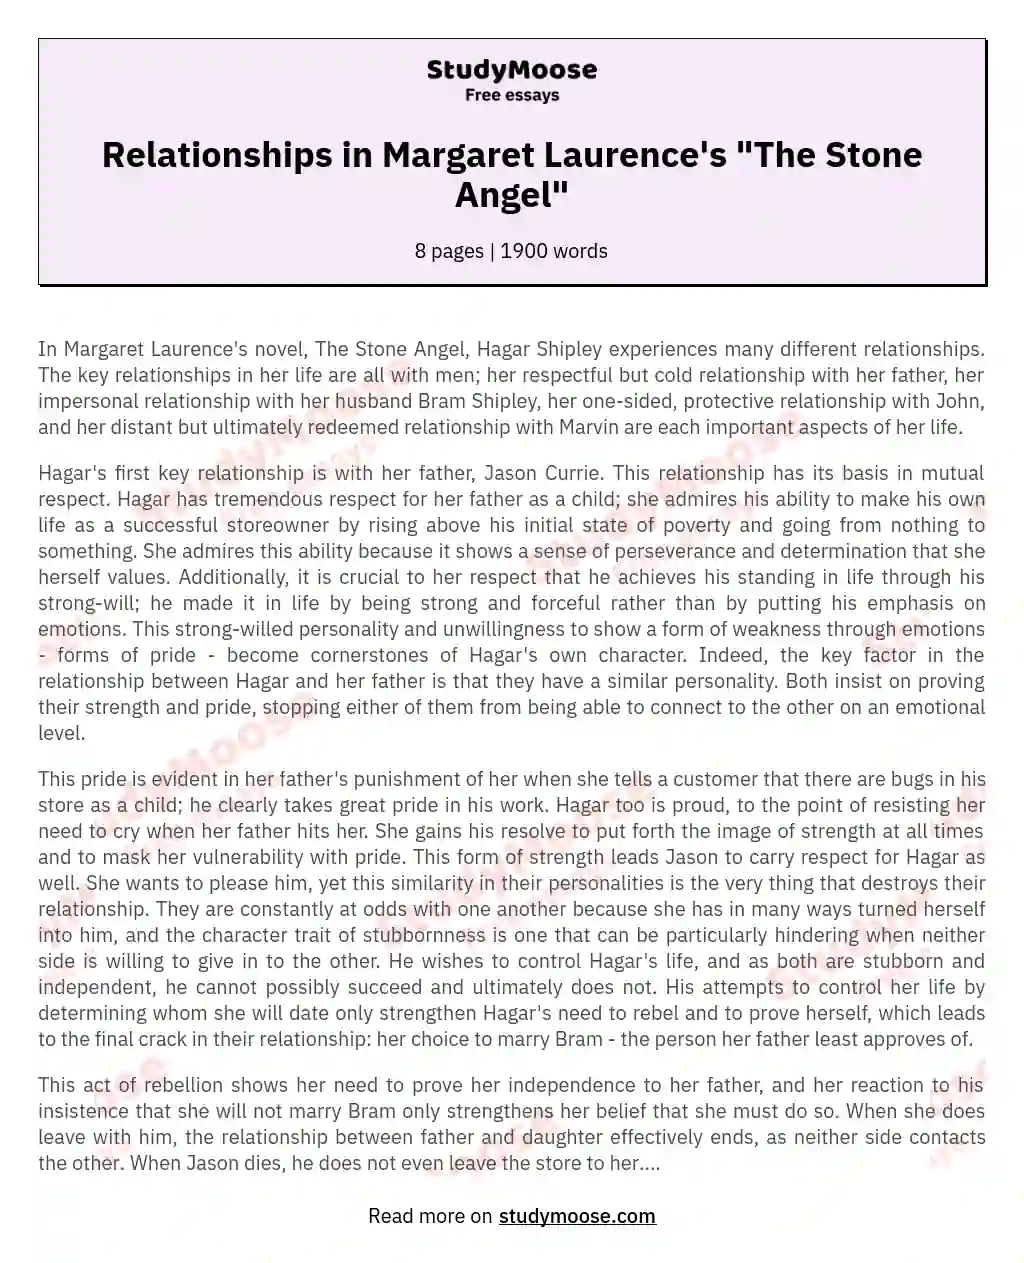 Relationships in Margaret Laurence's "The Stone Angel"